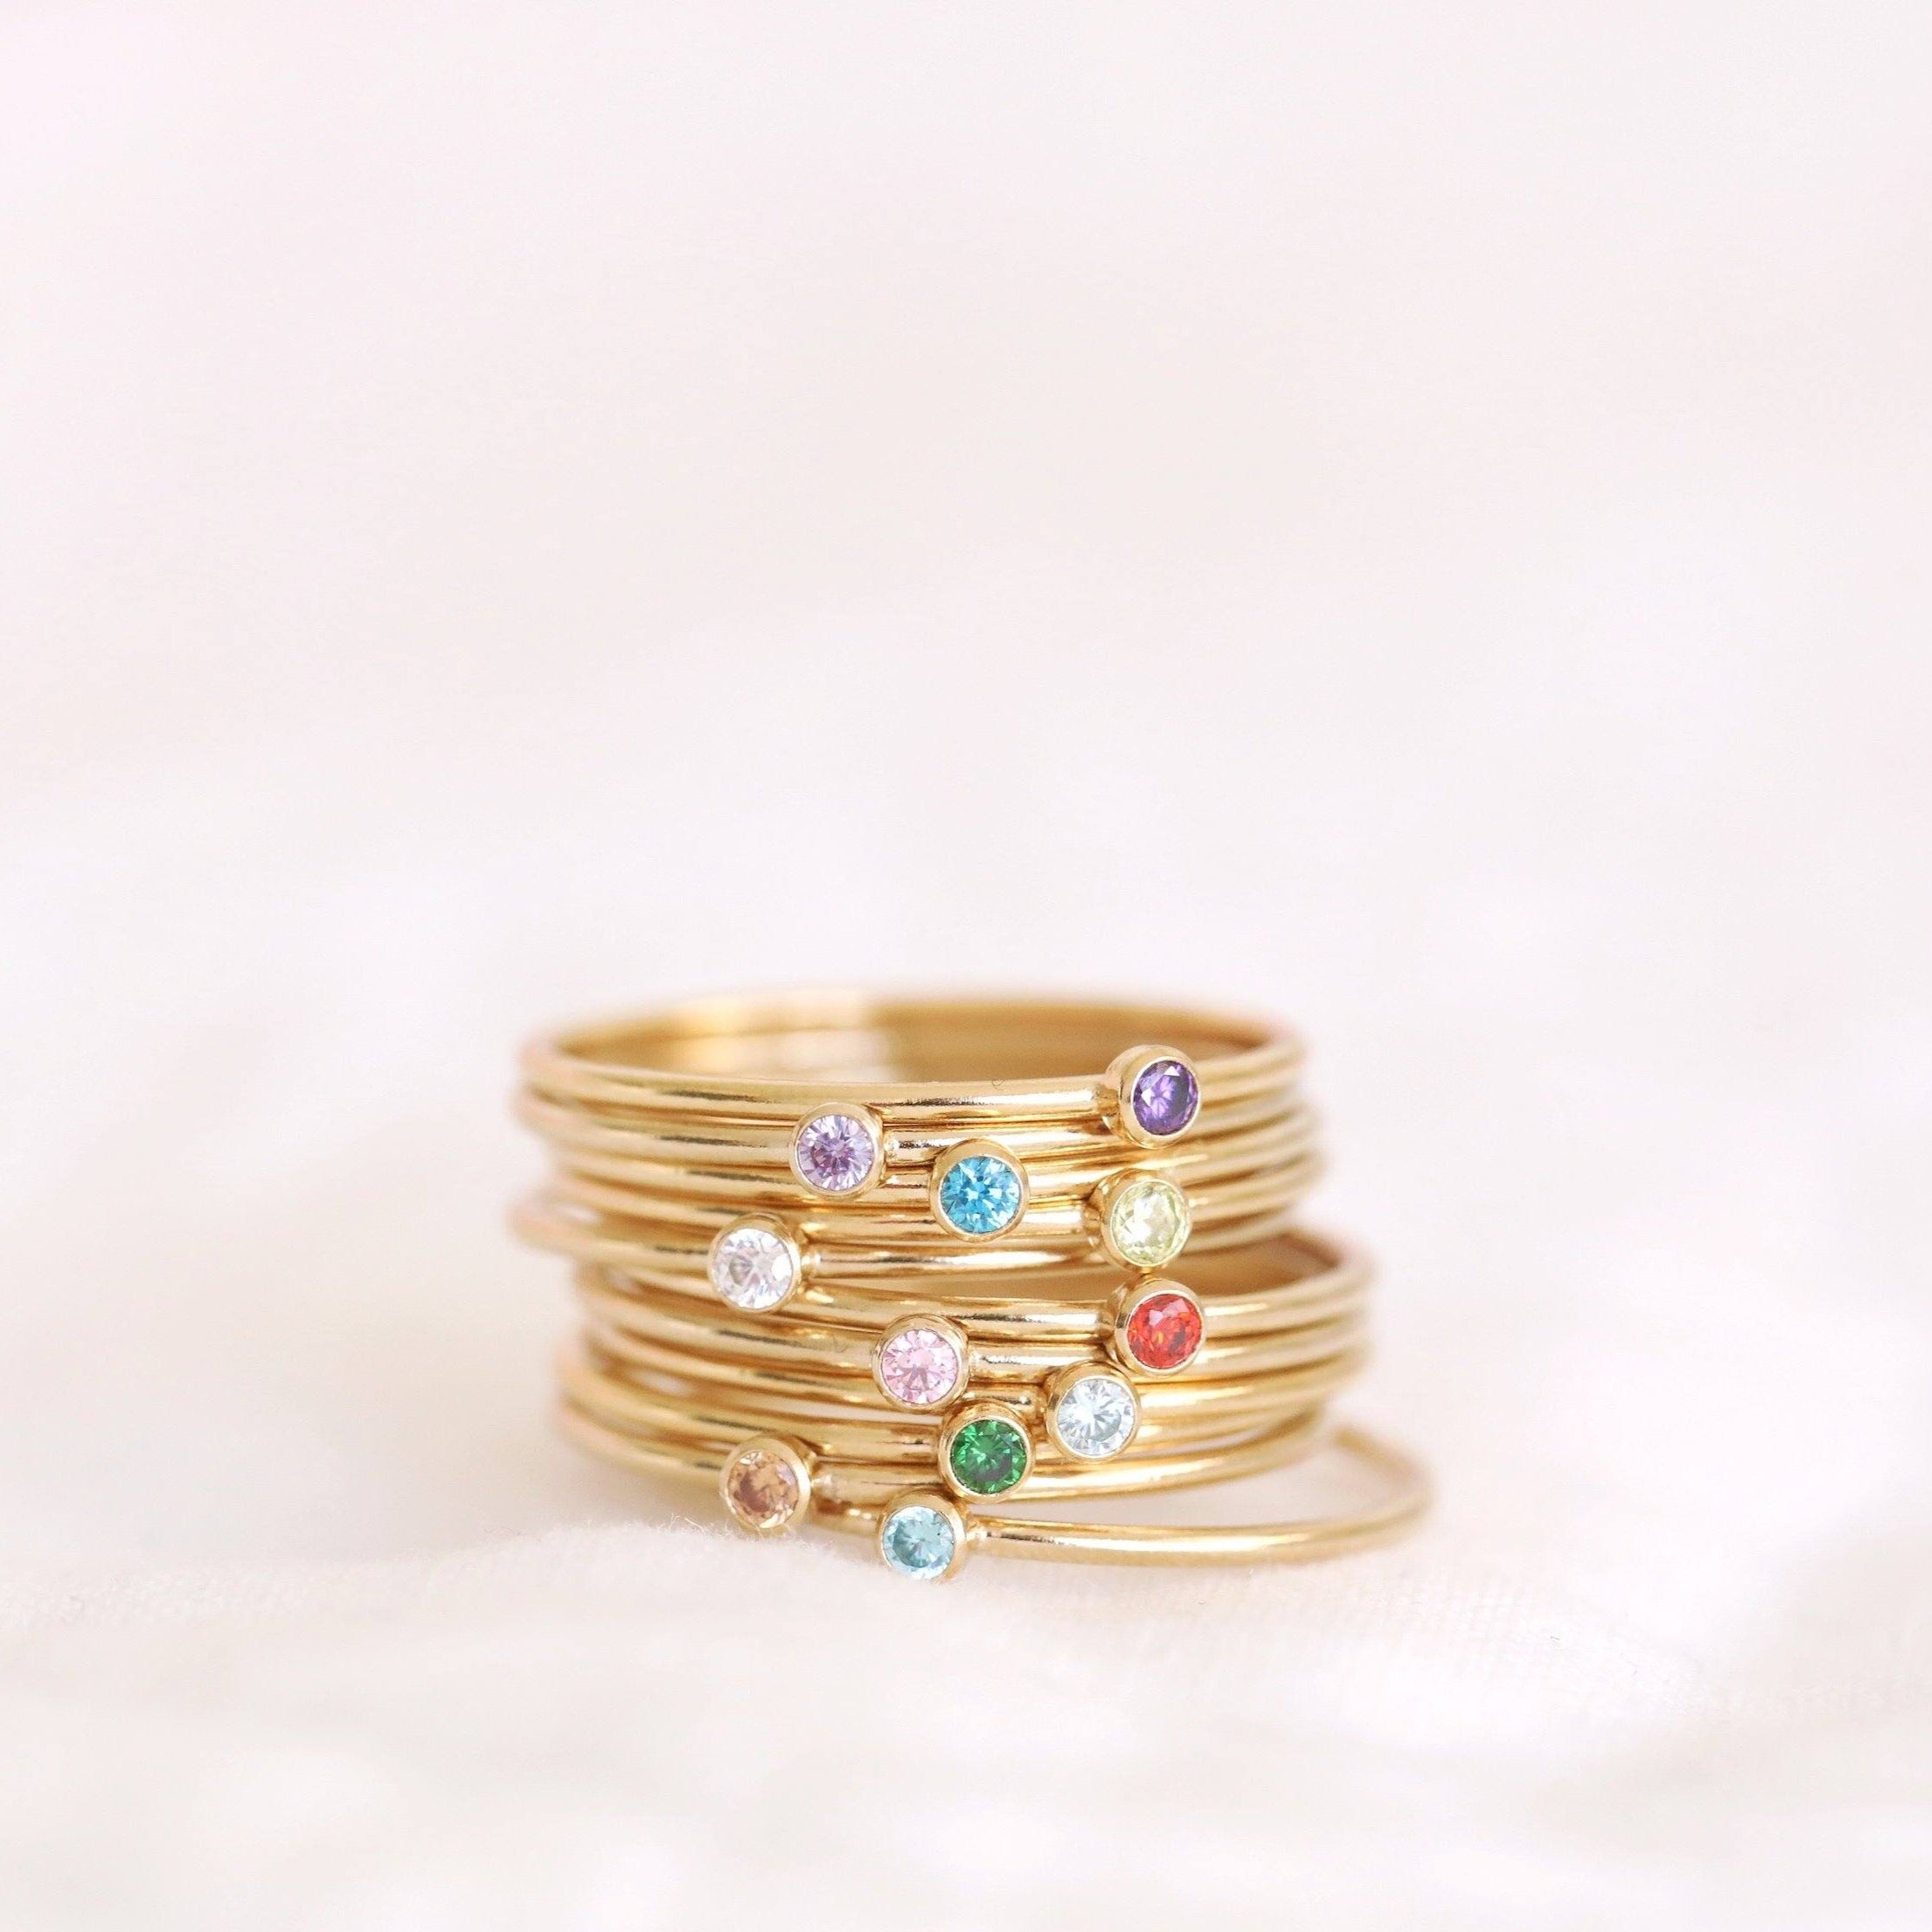 Handmade birthstone rings made with sterling silver and gold filled. Handmade birthstone rings sustainably made in Canada